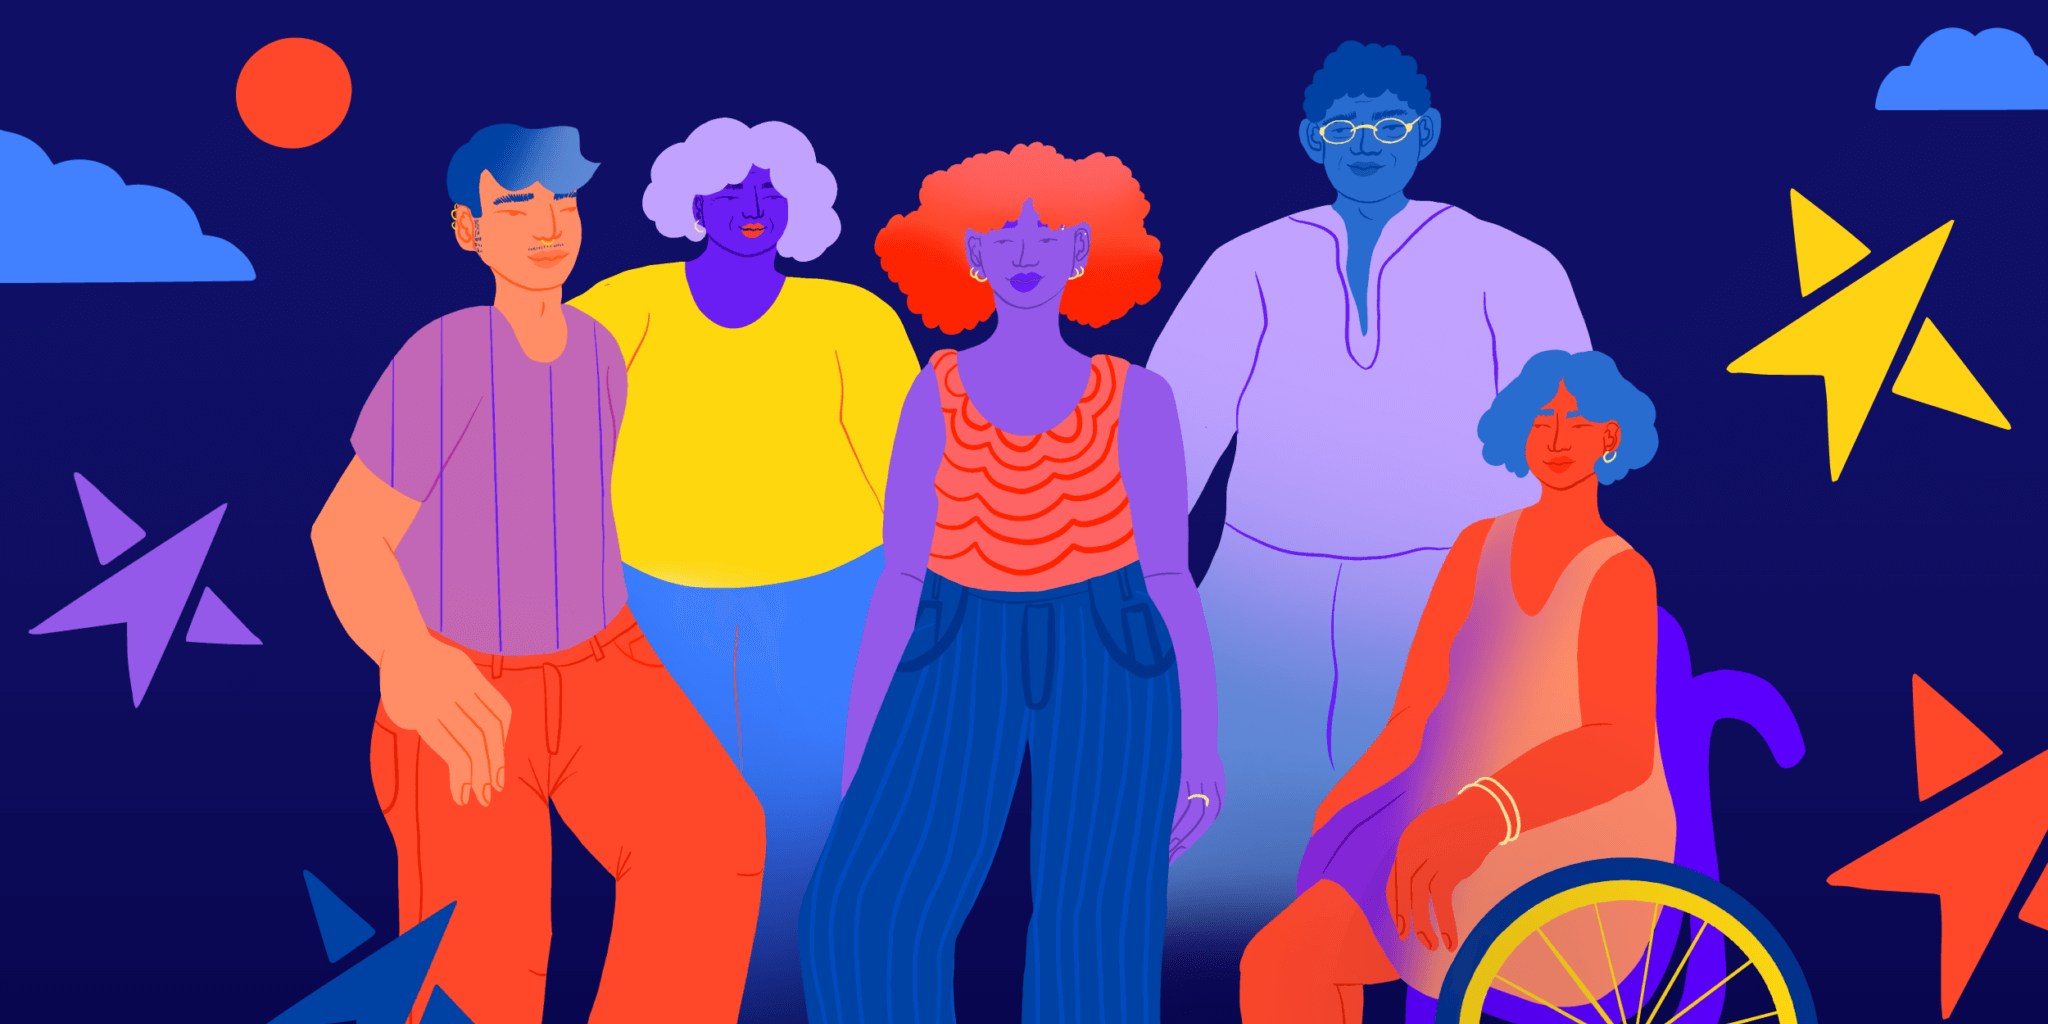 A colorful graphic depicting a group of individuals | Courtesy of The Trevor Project